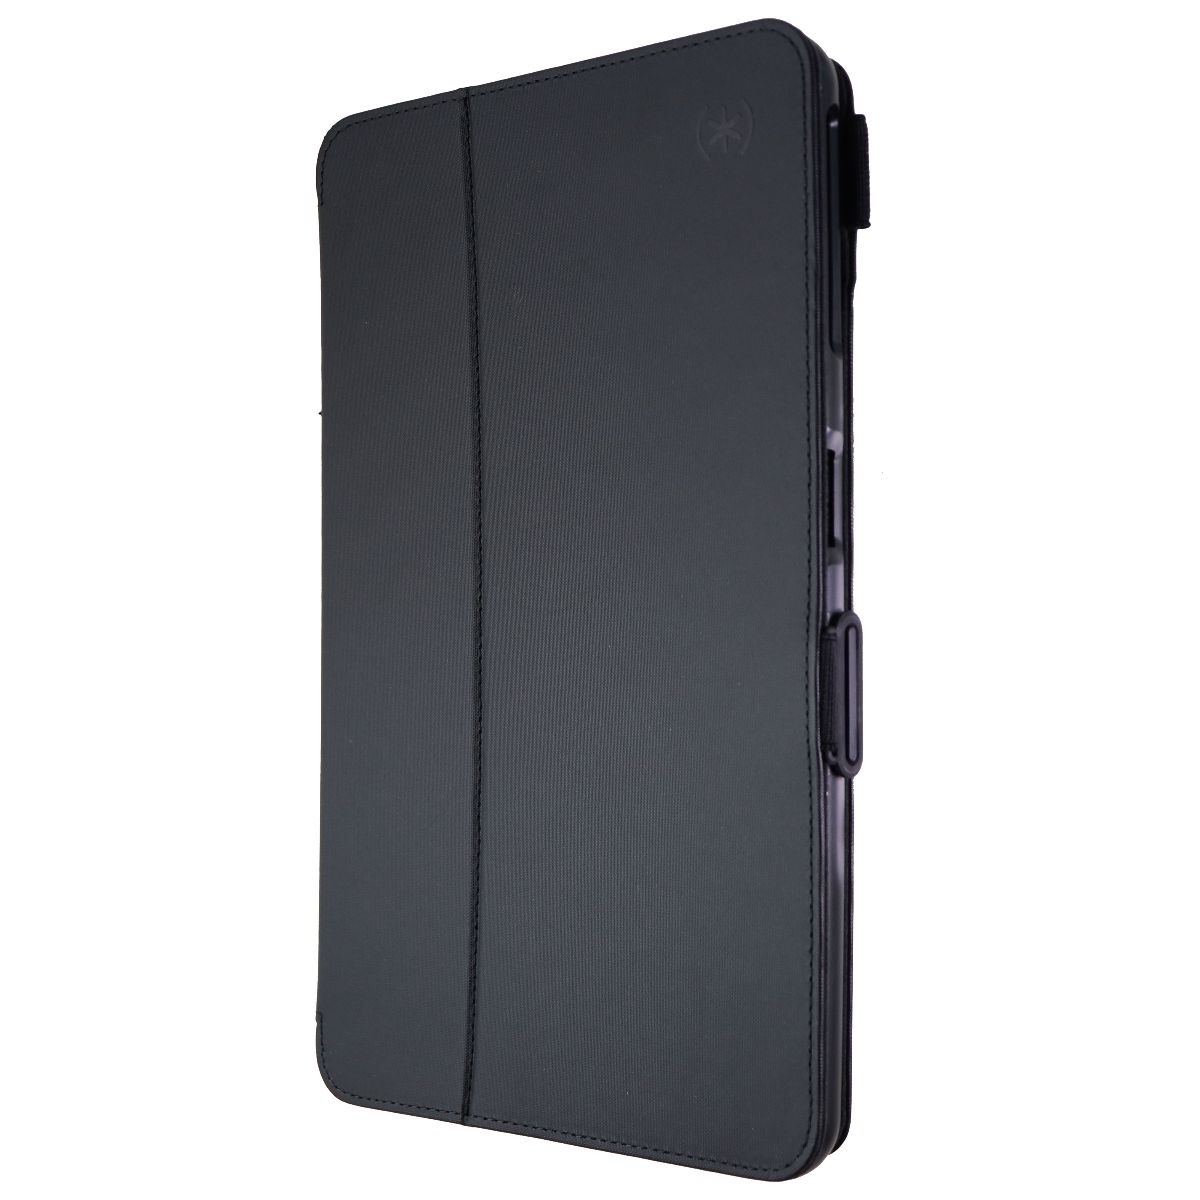 Speck Balance Folio Case And Stand For LG G Pad 5 (10.1 FHD) - Black